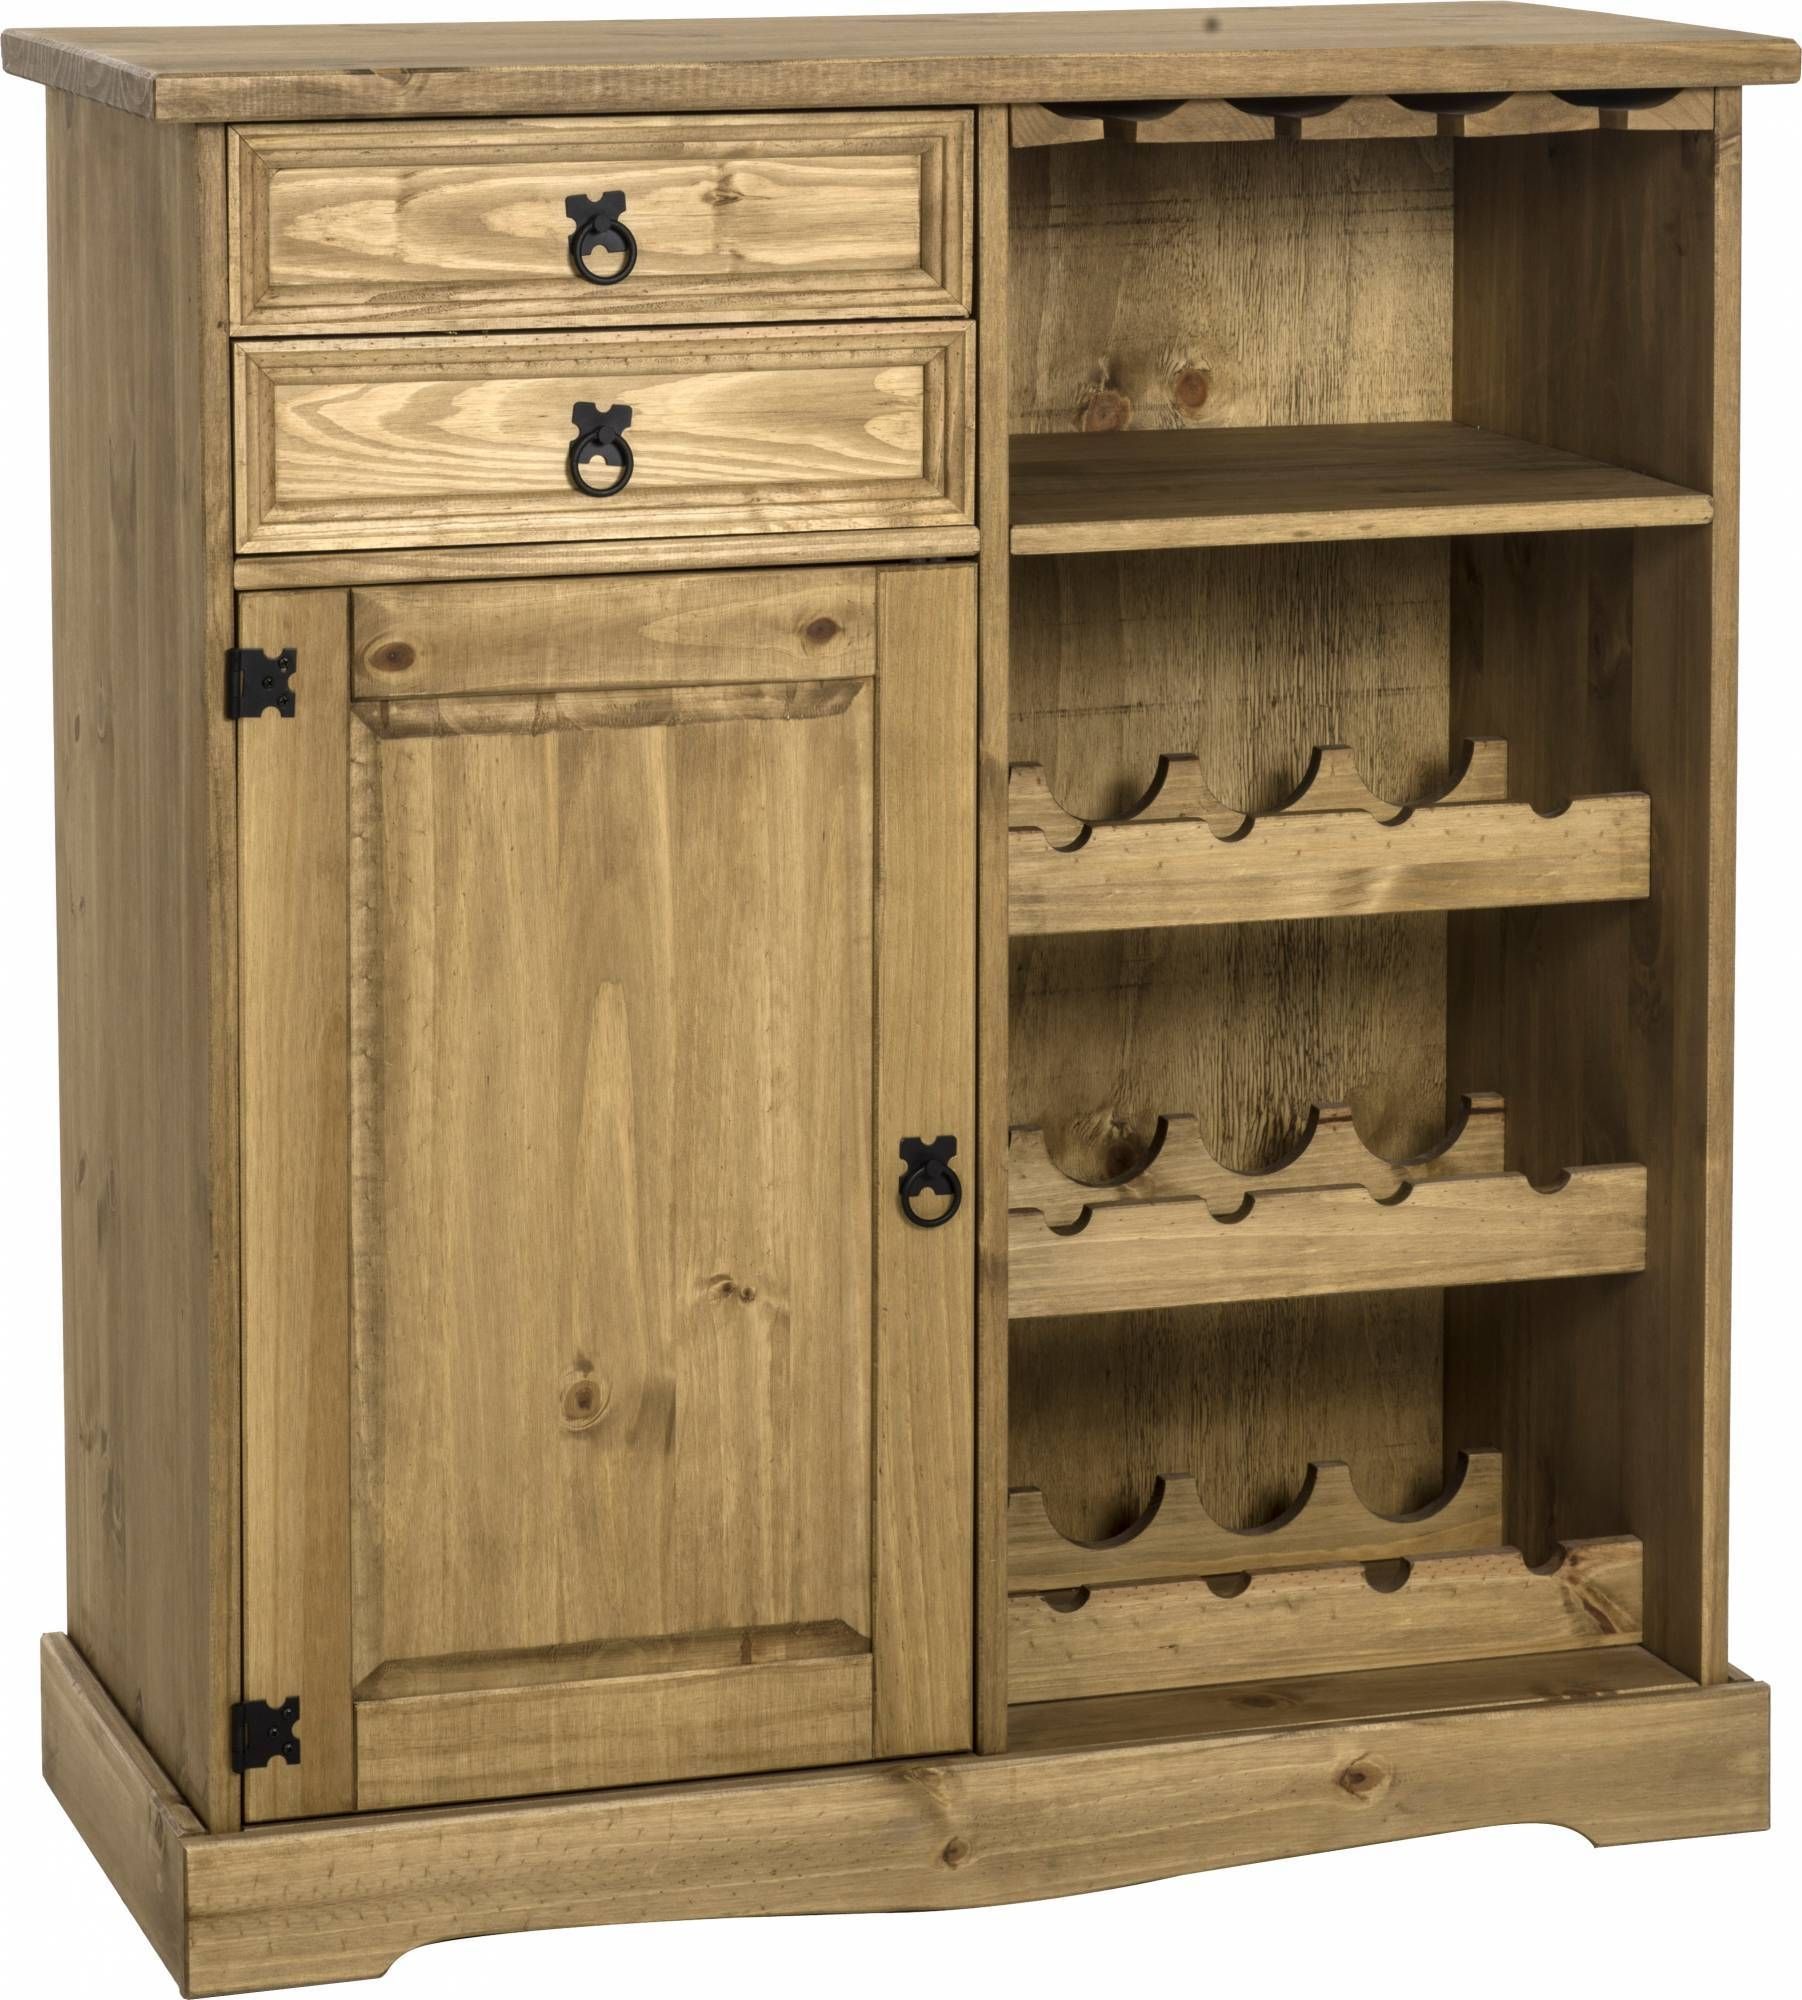 Seconique Corona Mexican Pine Sideboard & Wine Rack Unit – Wine Inside Best And Newest Mexican Pine Sideboards (View 10 of 15)